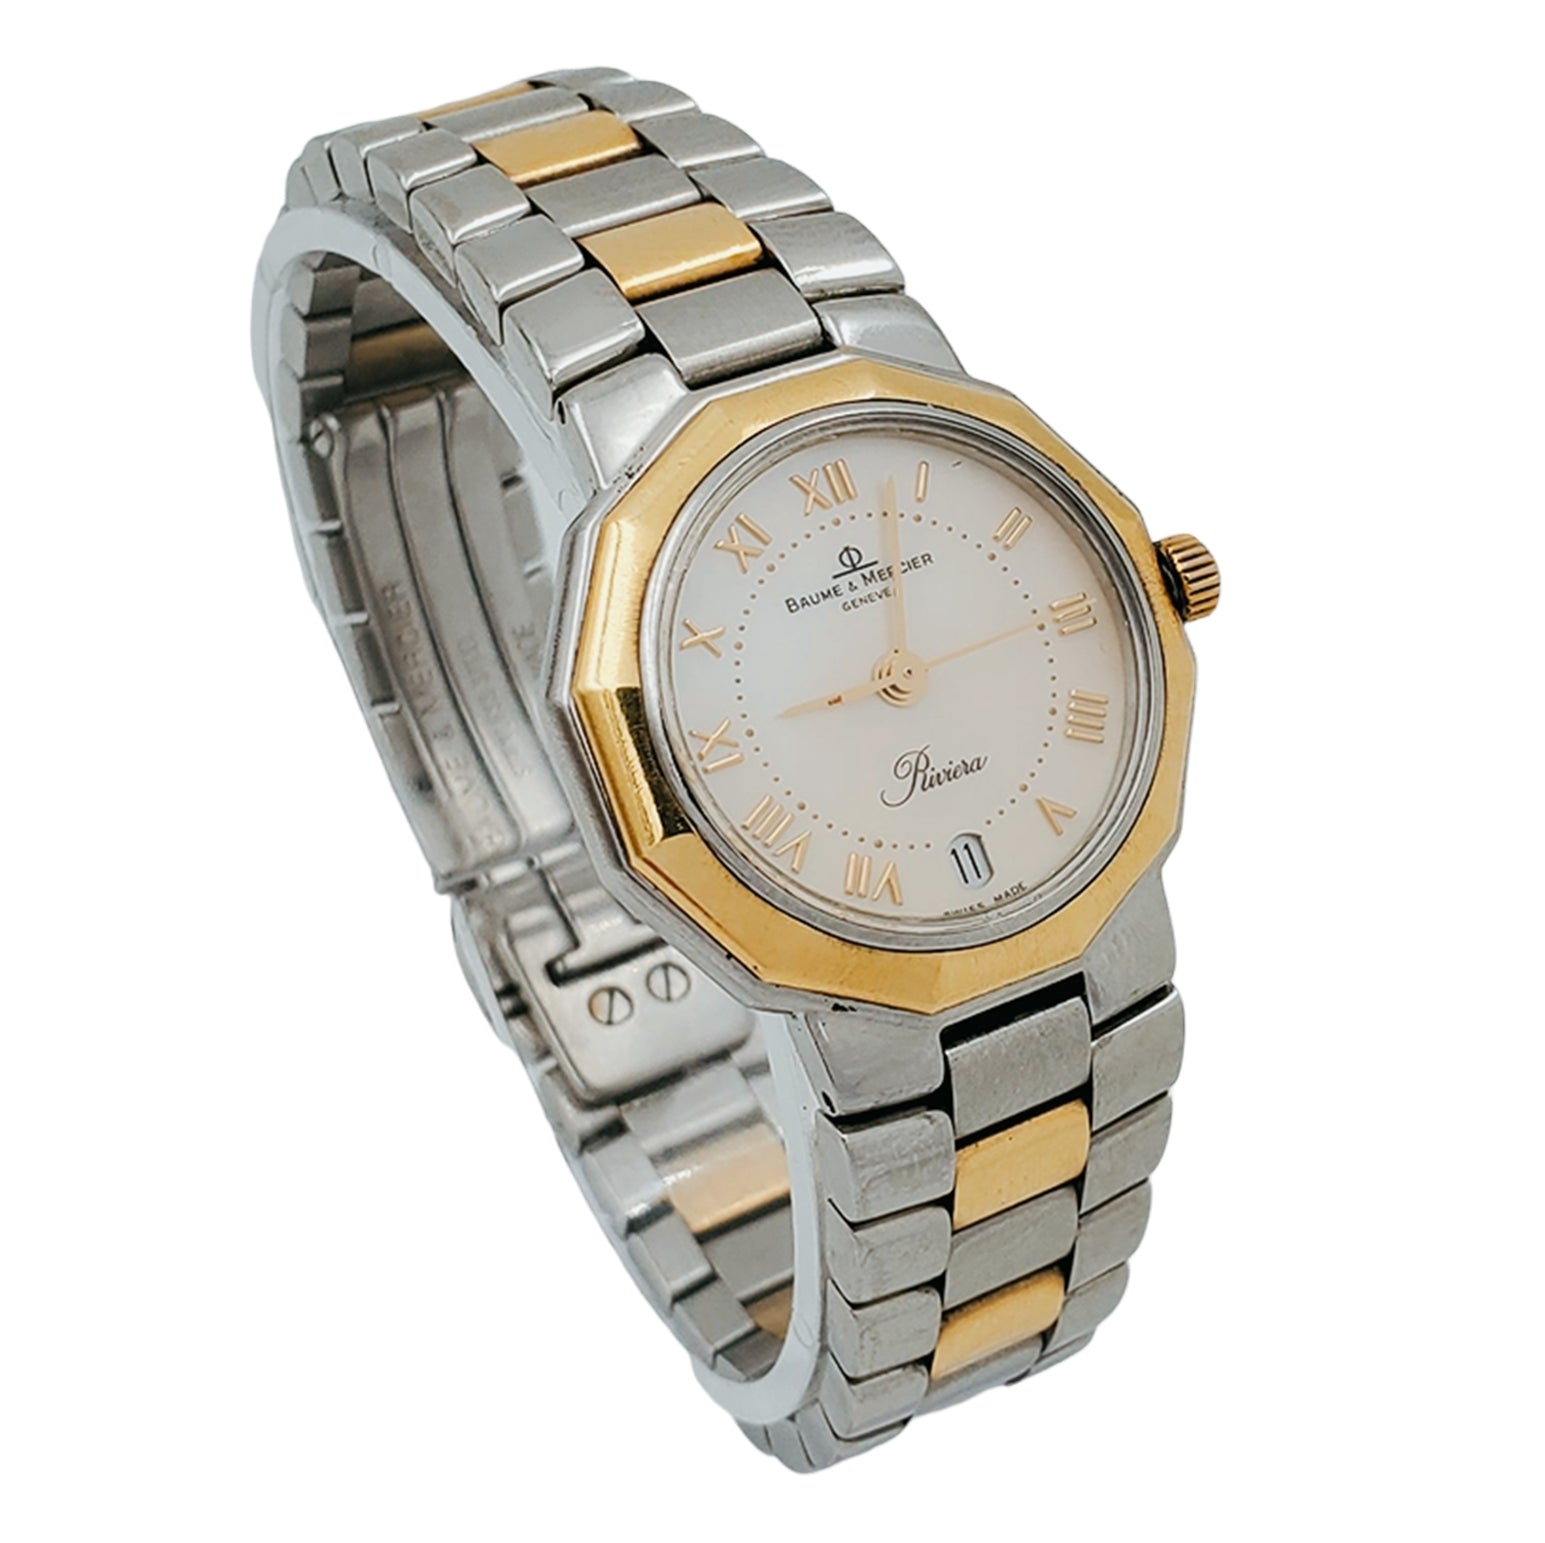 Ladies Baume & Mercier Riviera Two Tone Gold Plated / Stainless Steel Watch with Mother of Pearl Dial. (Pre-Owned)